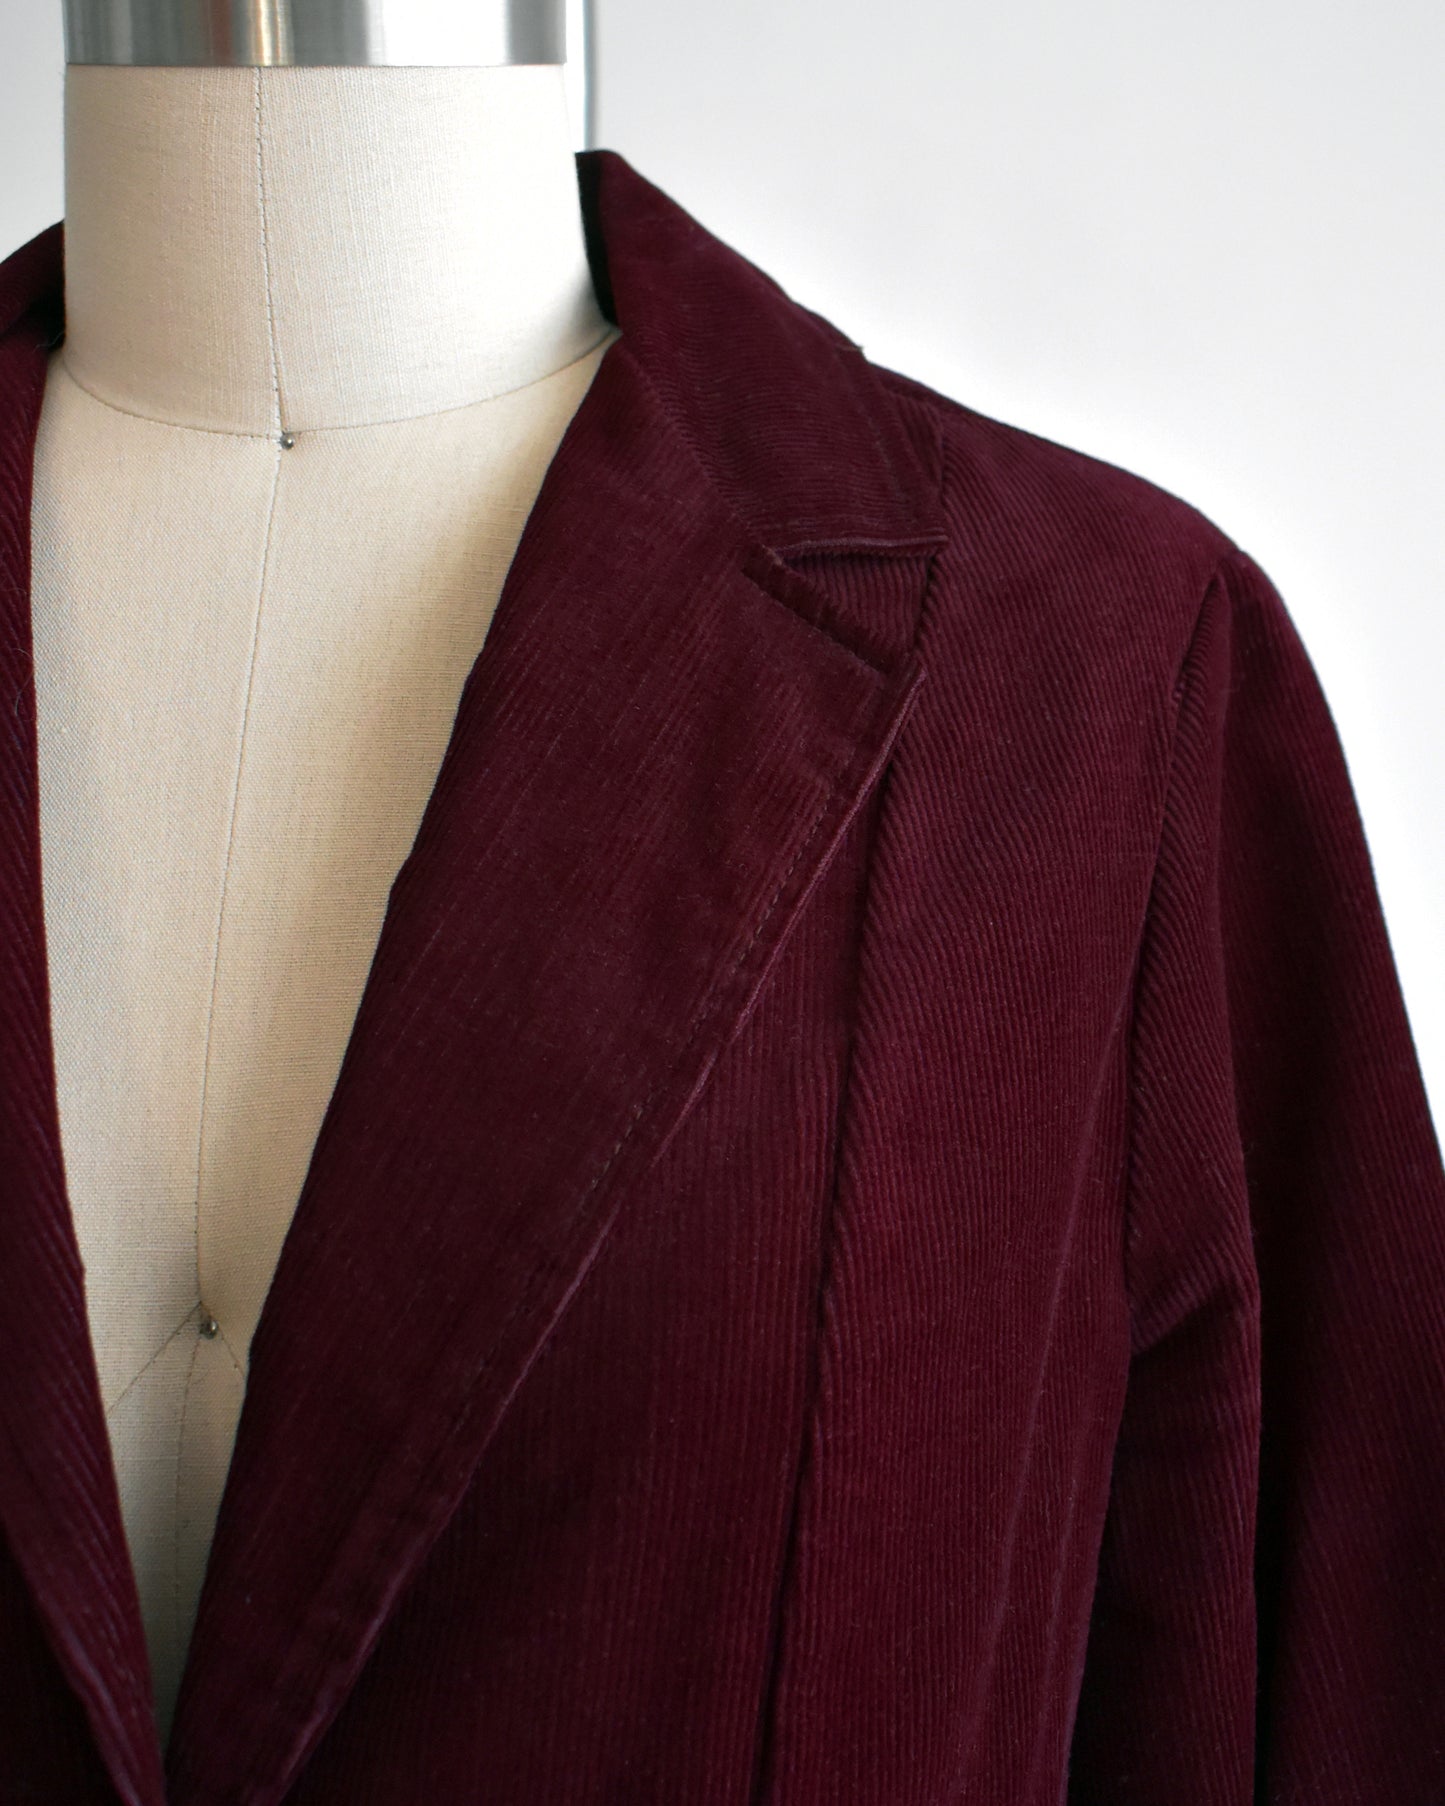 Close up of the lapel on the burgundy blazer